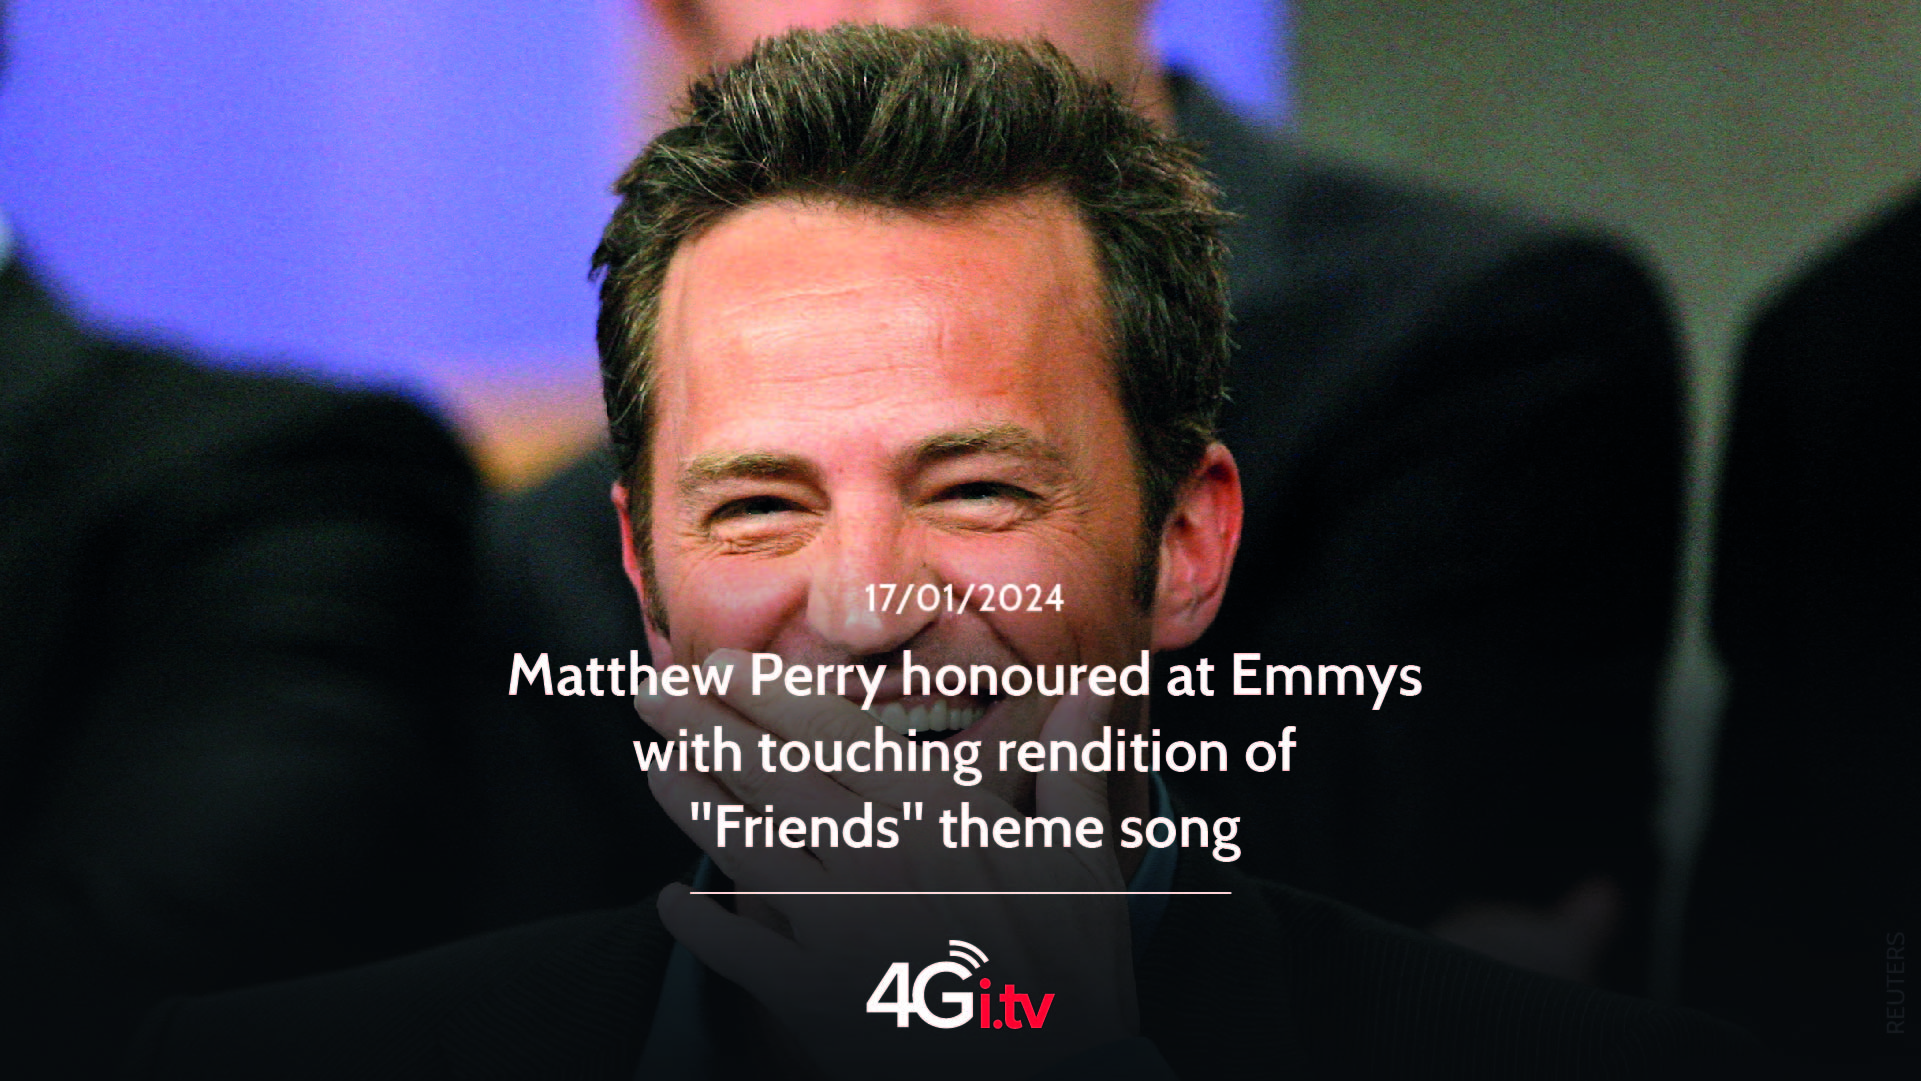 Lee más sobre el artículo Matthew Perry honoured at Emmys with touching rendition of “Friends” theme song